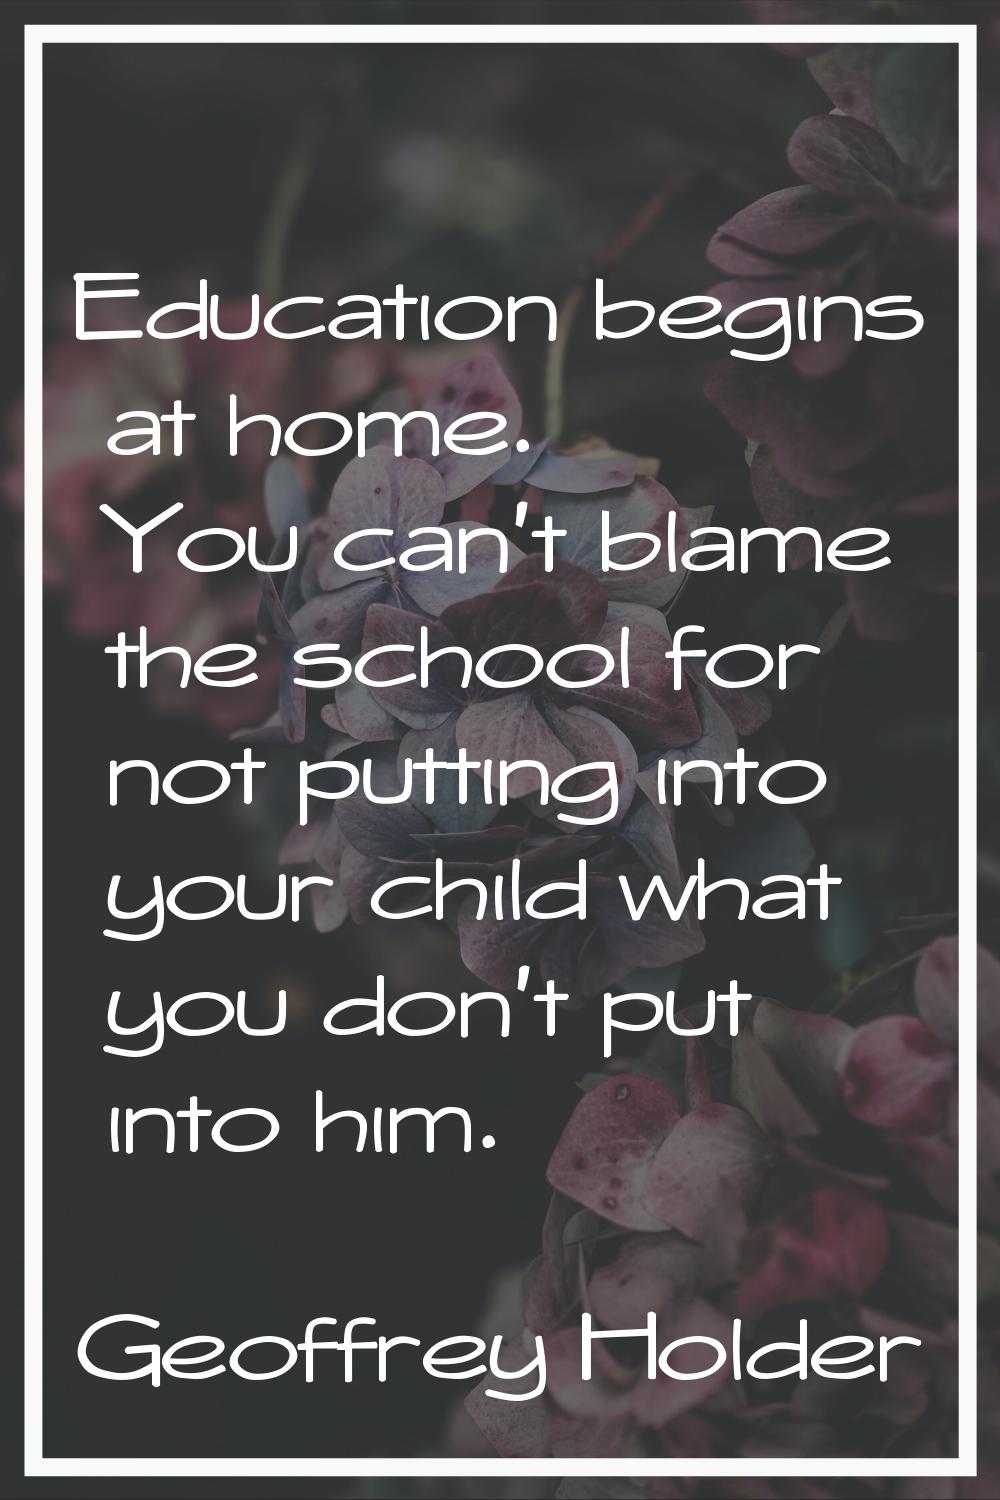 Education begins at home. You can't blame the school for not putting into your child what you don't